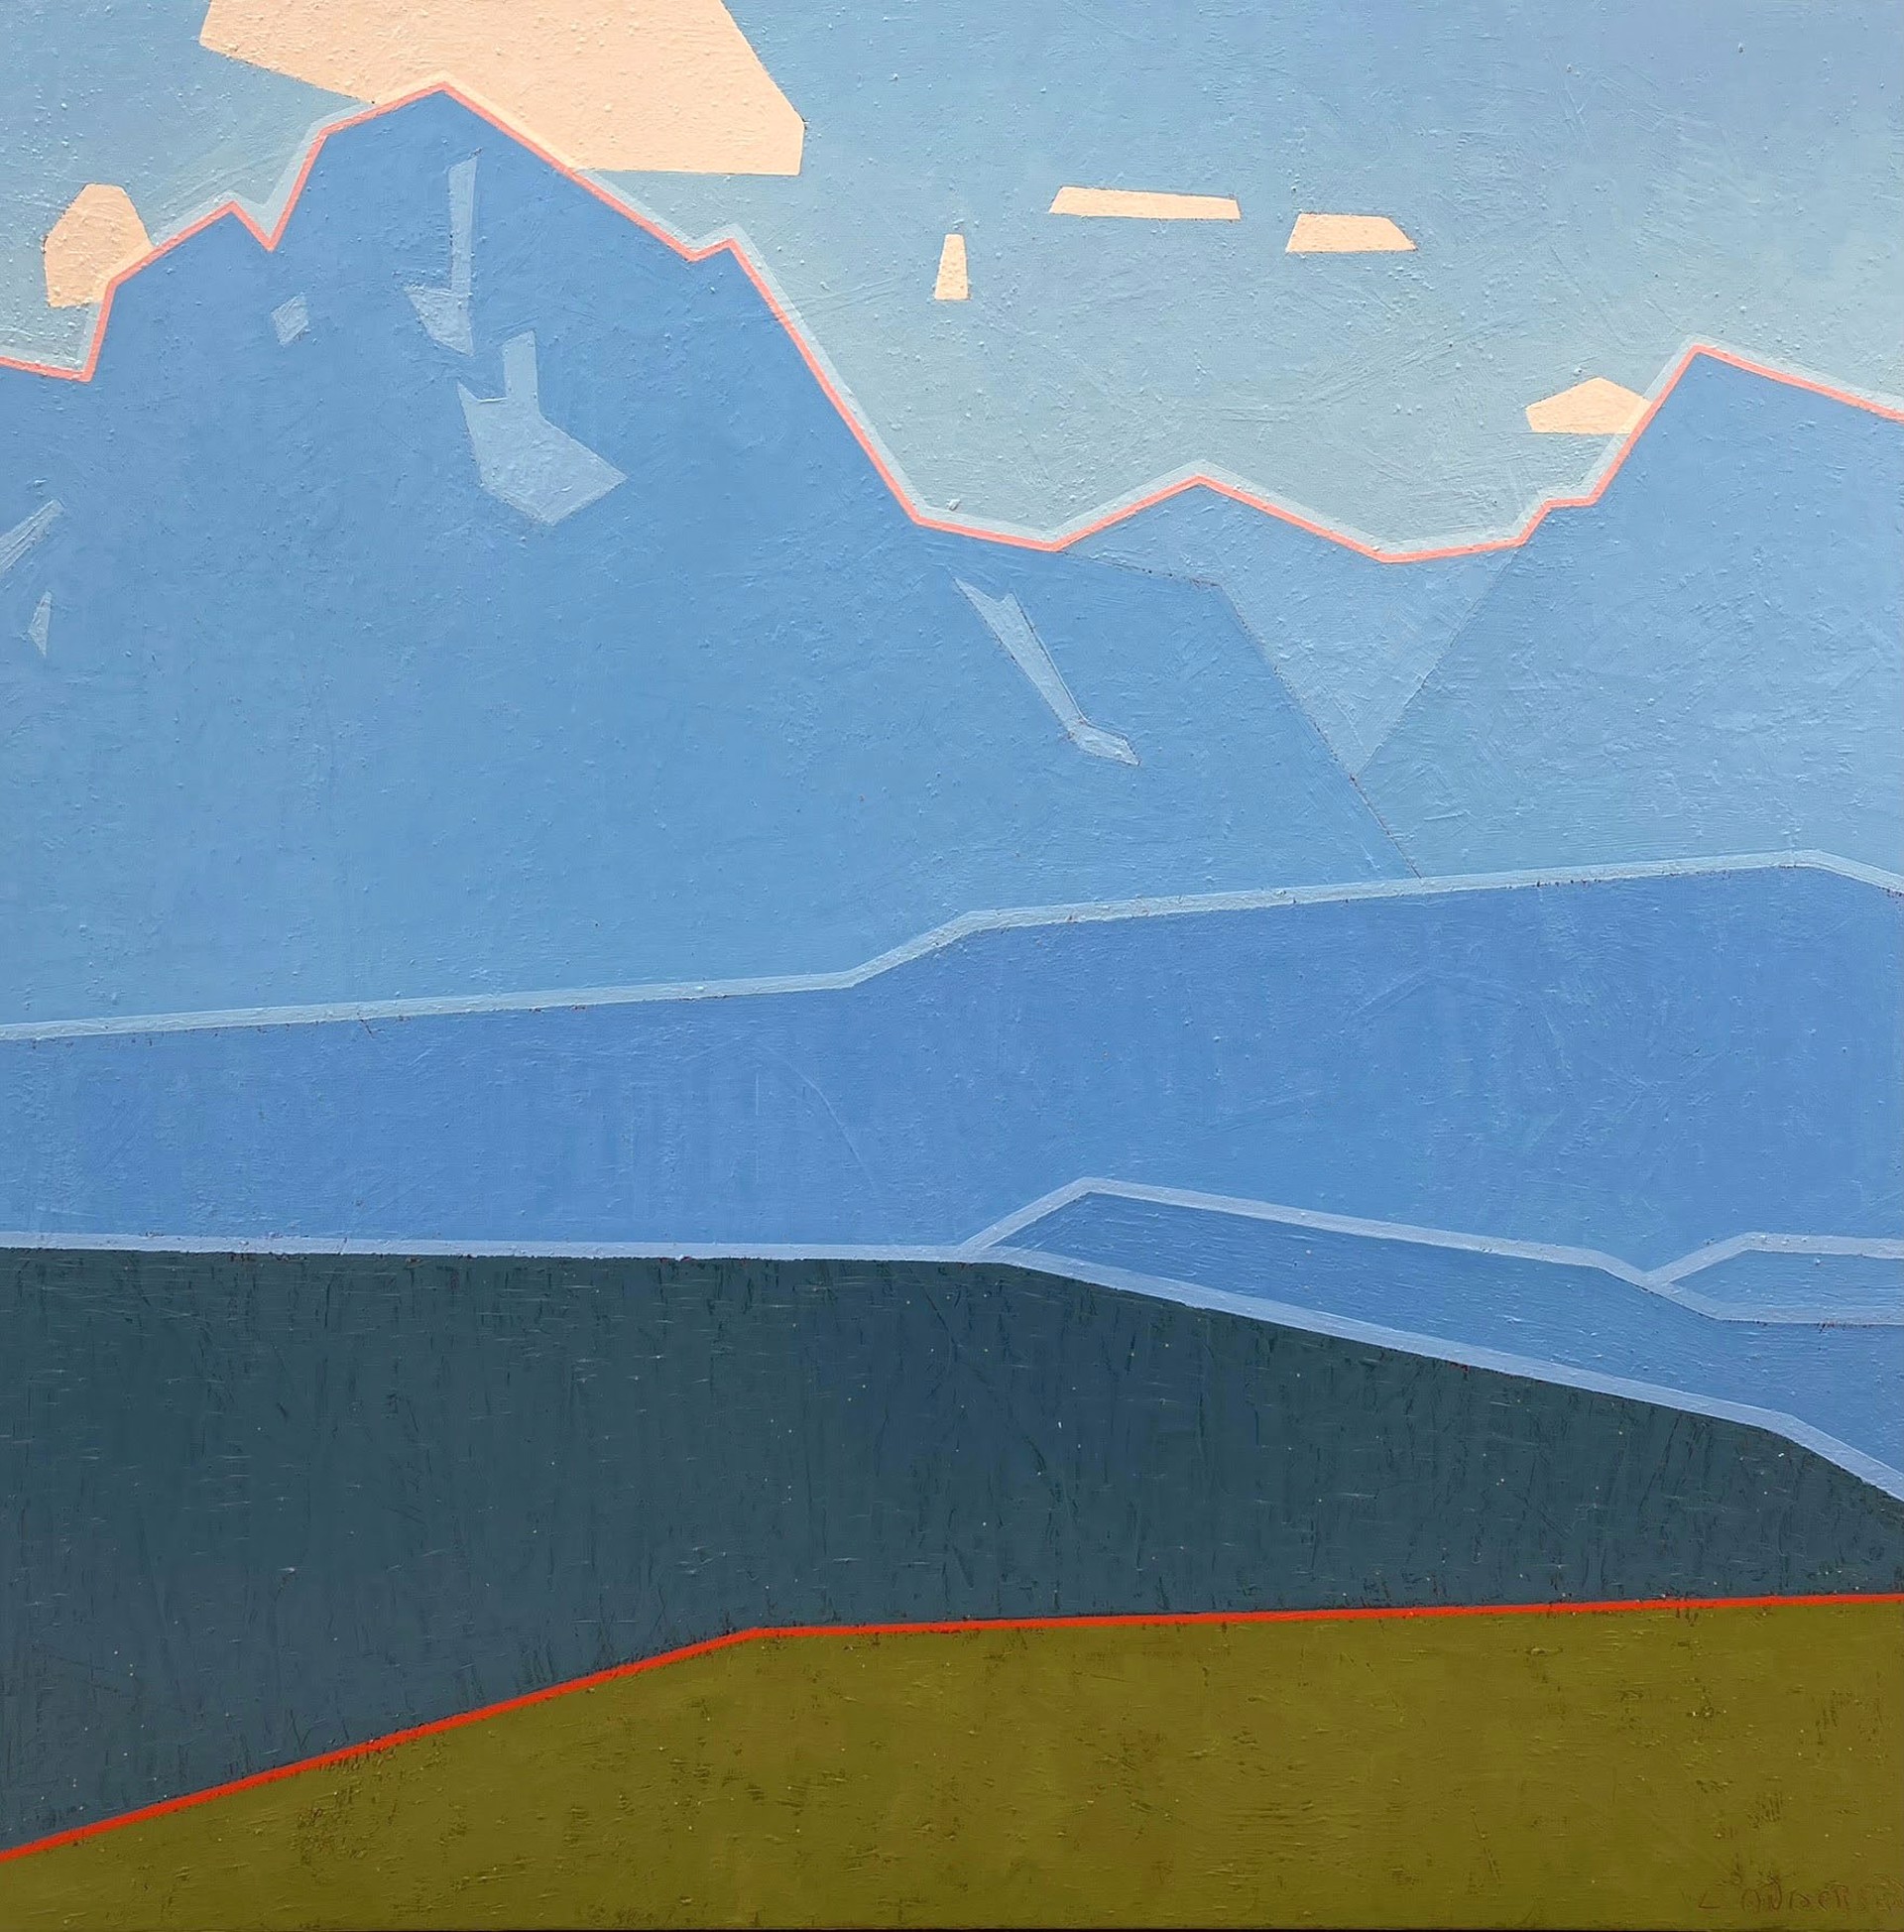 Original Oil Painting By Luke Anderson Featuring Mount Moran Landscape In Linear Style